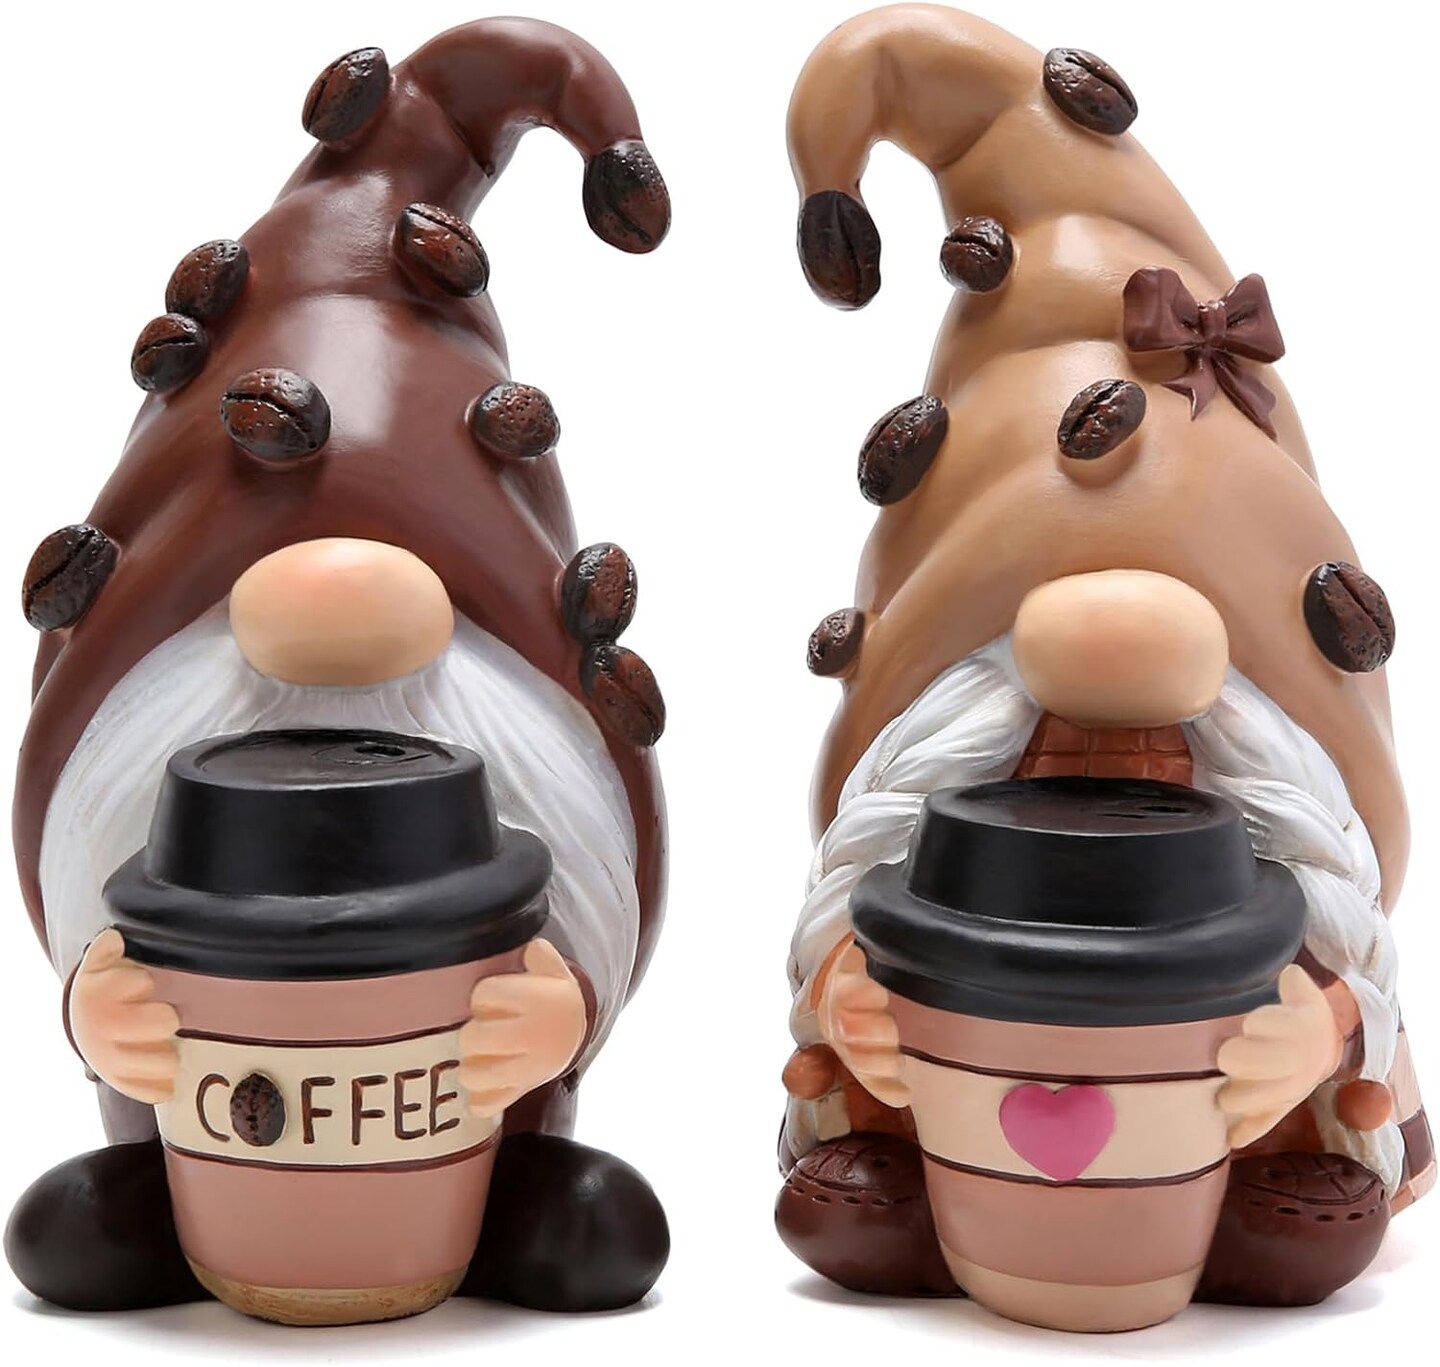 Coffee-Themed Gnome: Indoor Home Decor, Outdoor Porches, Coffee Bar Statue, Decoration for All Seasons - Swedish Tomte Elf Dwarf Figurines Concept